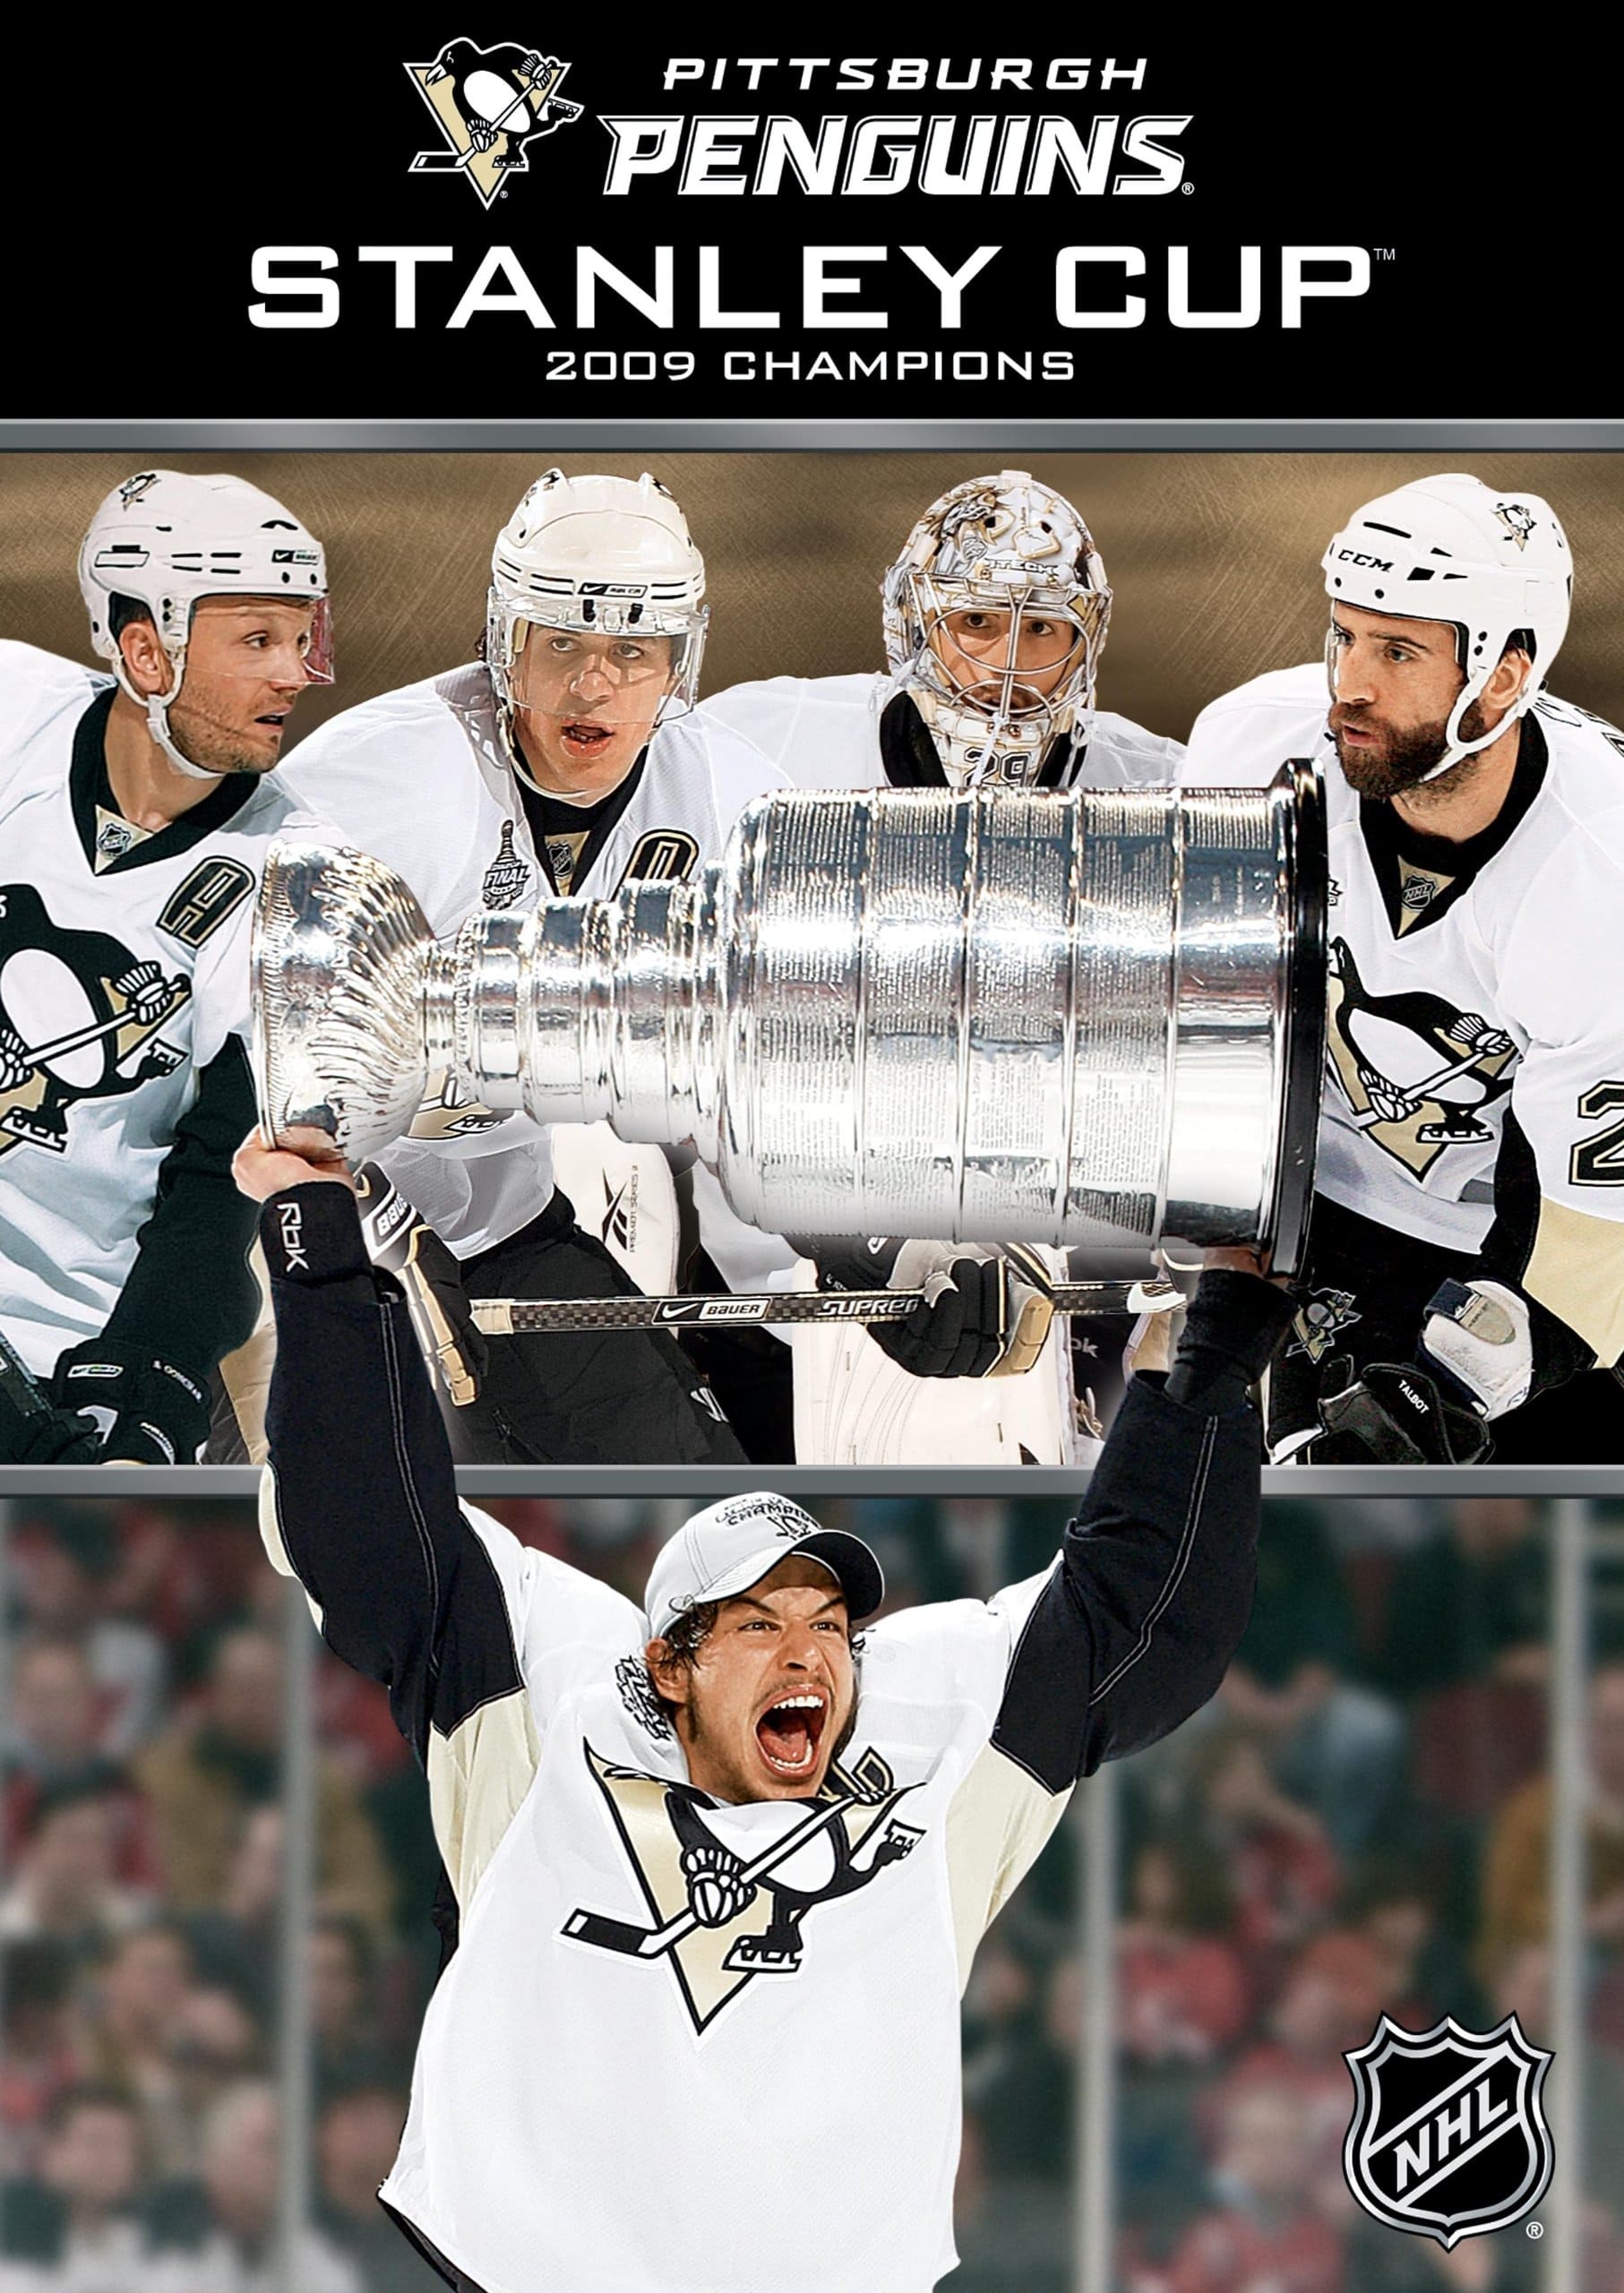 Pittsburgh Penguins Stanley Cup 2009 Champions